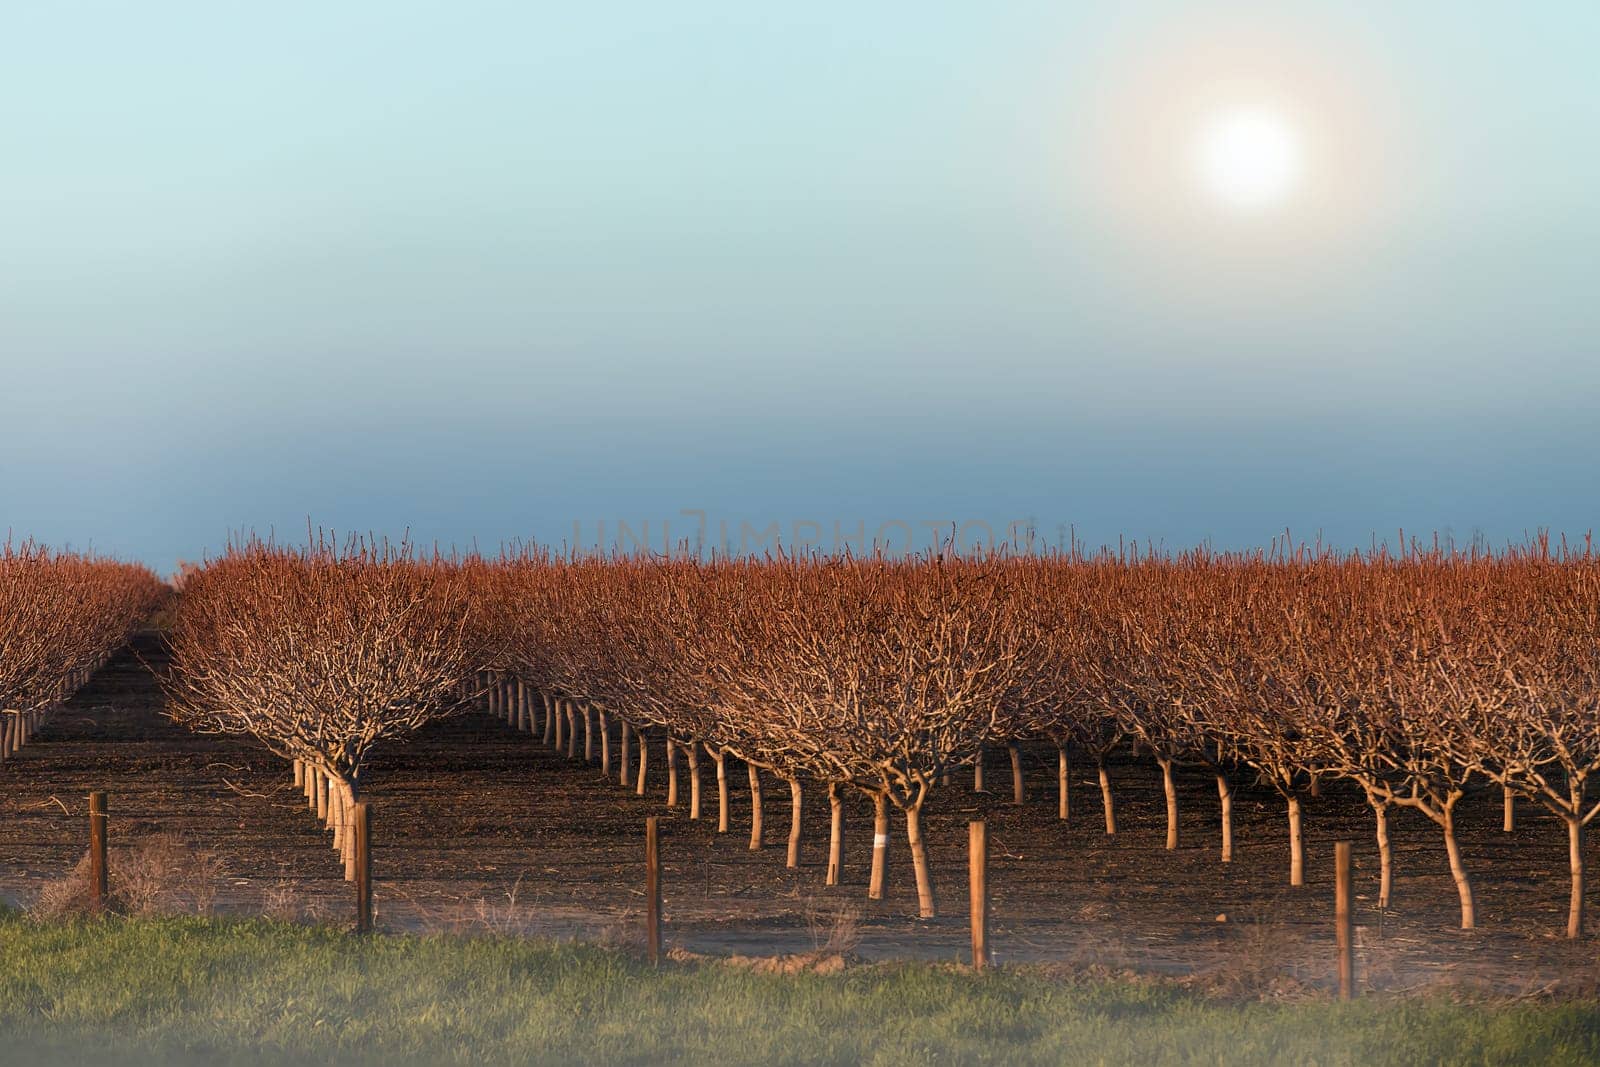 A captivating photograph capturing the essence of a vineyard's serenade as sunlit grapes cling to barren branches, creating intricate silhouettes against a backdrop of gentle fog. This scene embodies the vineyard's resilience and the beauty of transitioning seasons, while the ethereal fog lends an enchanting, dreamlike quality to the landscape.